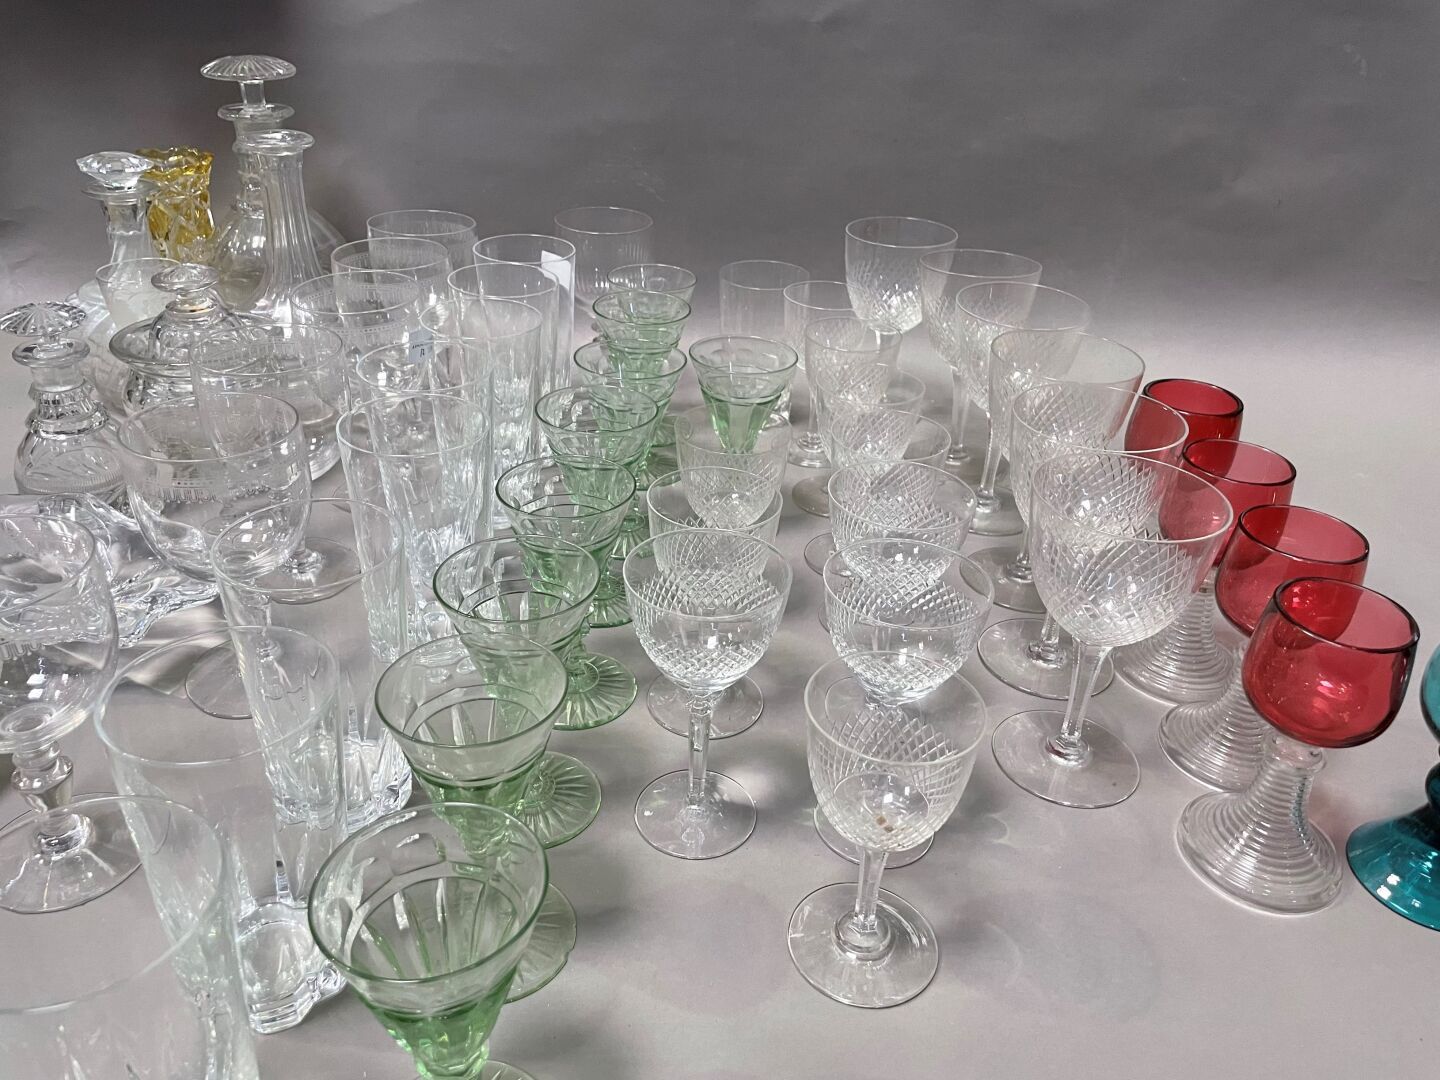 Null A case of crystal and glassware: glasses, carafes, vases